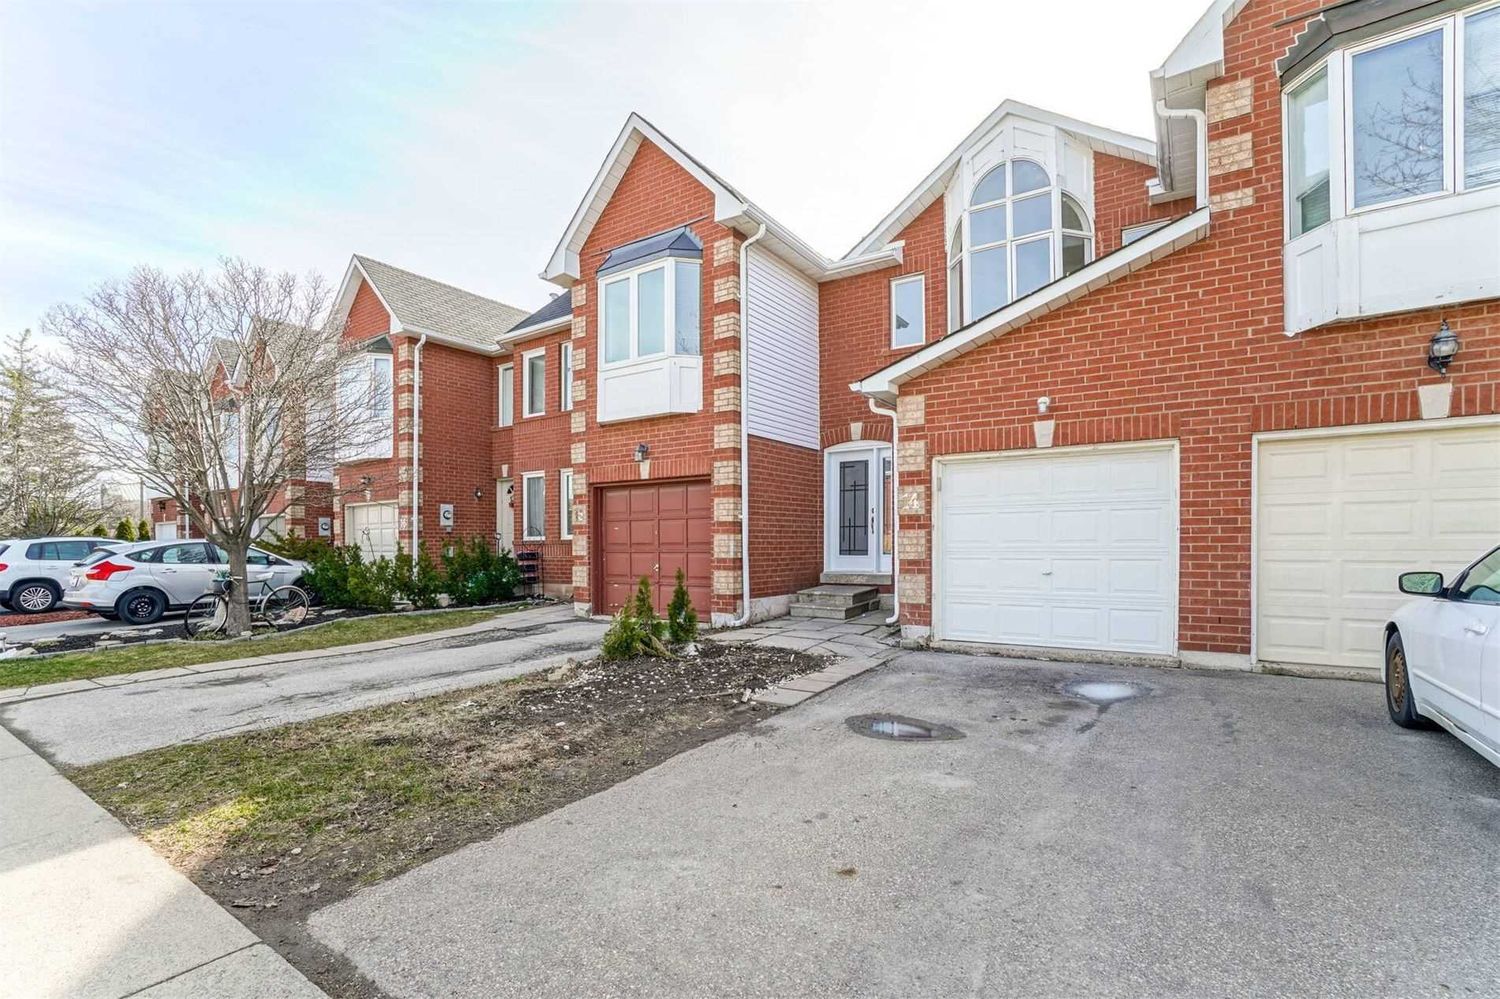 1240 Westview Ter. 1240 Westview Terrace Townhomes is located in  Oakville, Toronto - image #1 of 2